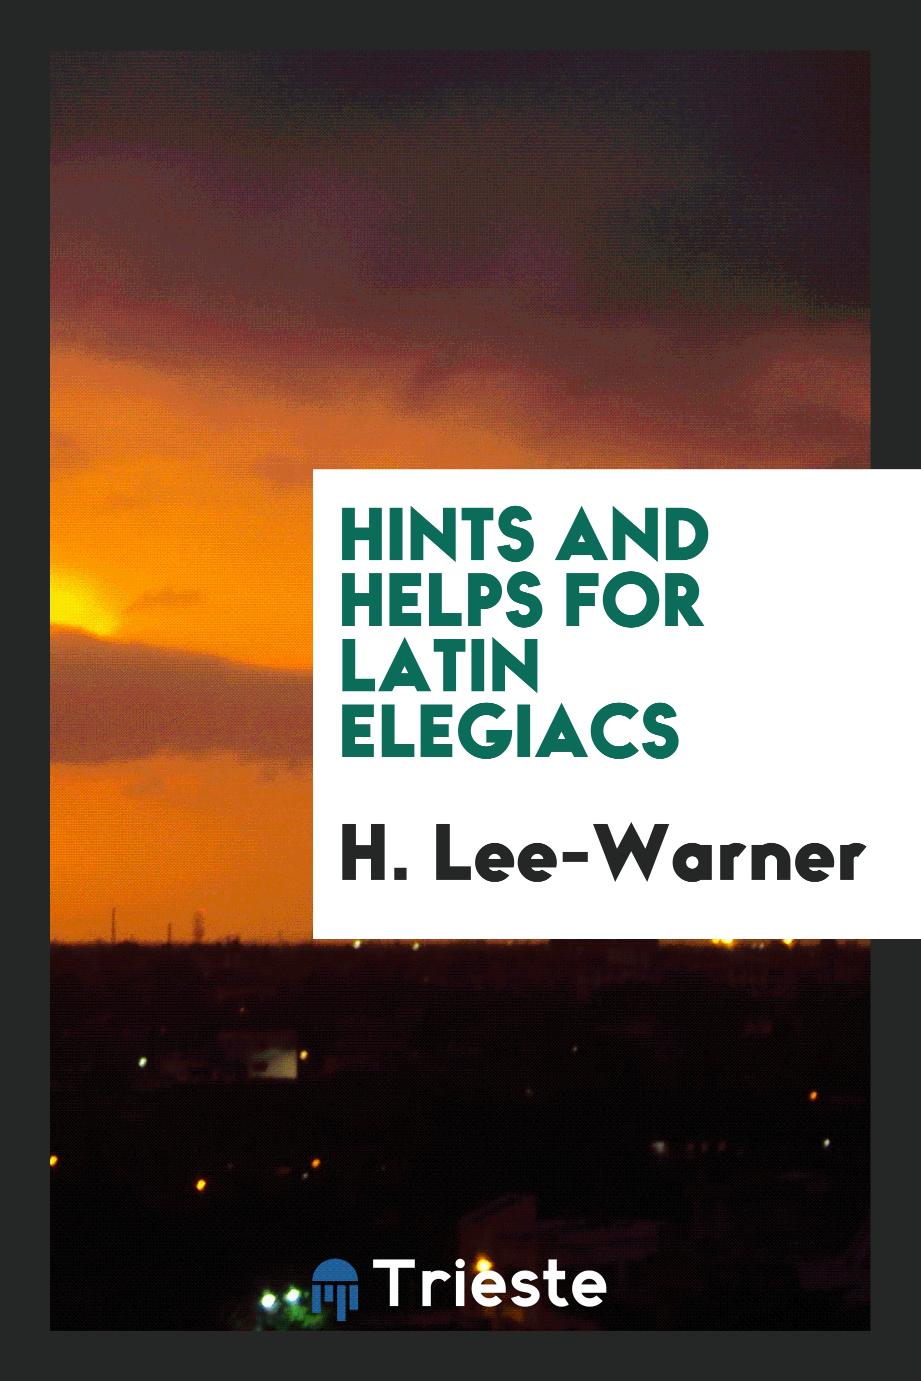 Hints and helps for Latin elegiacs